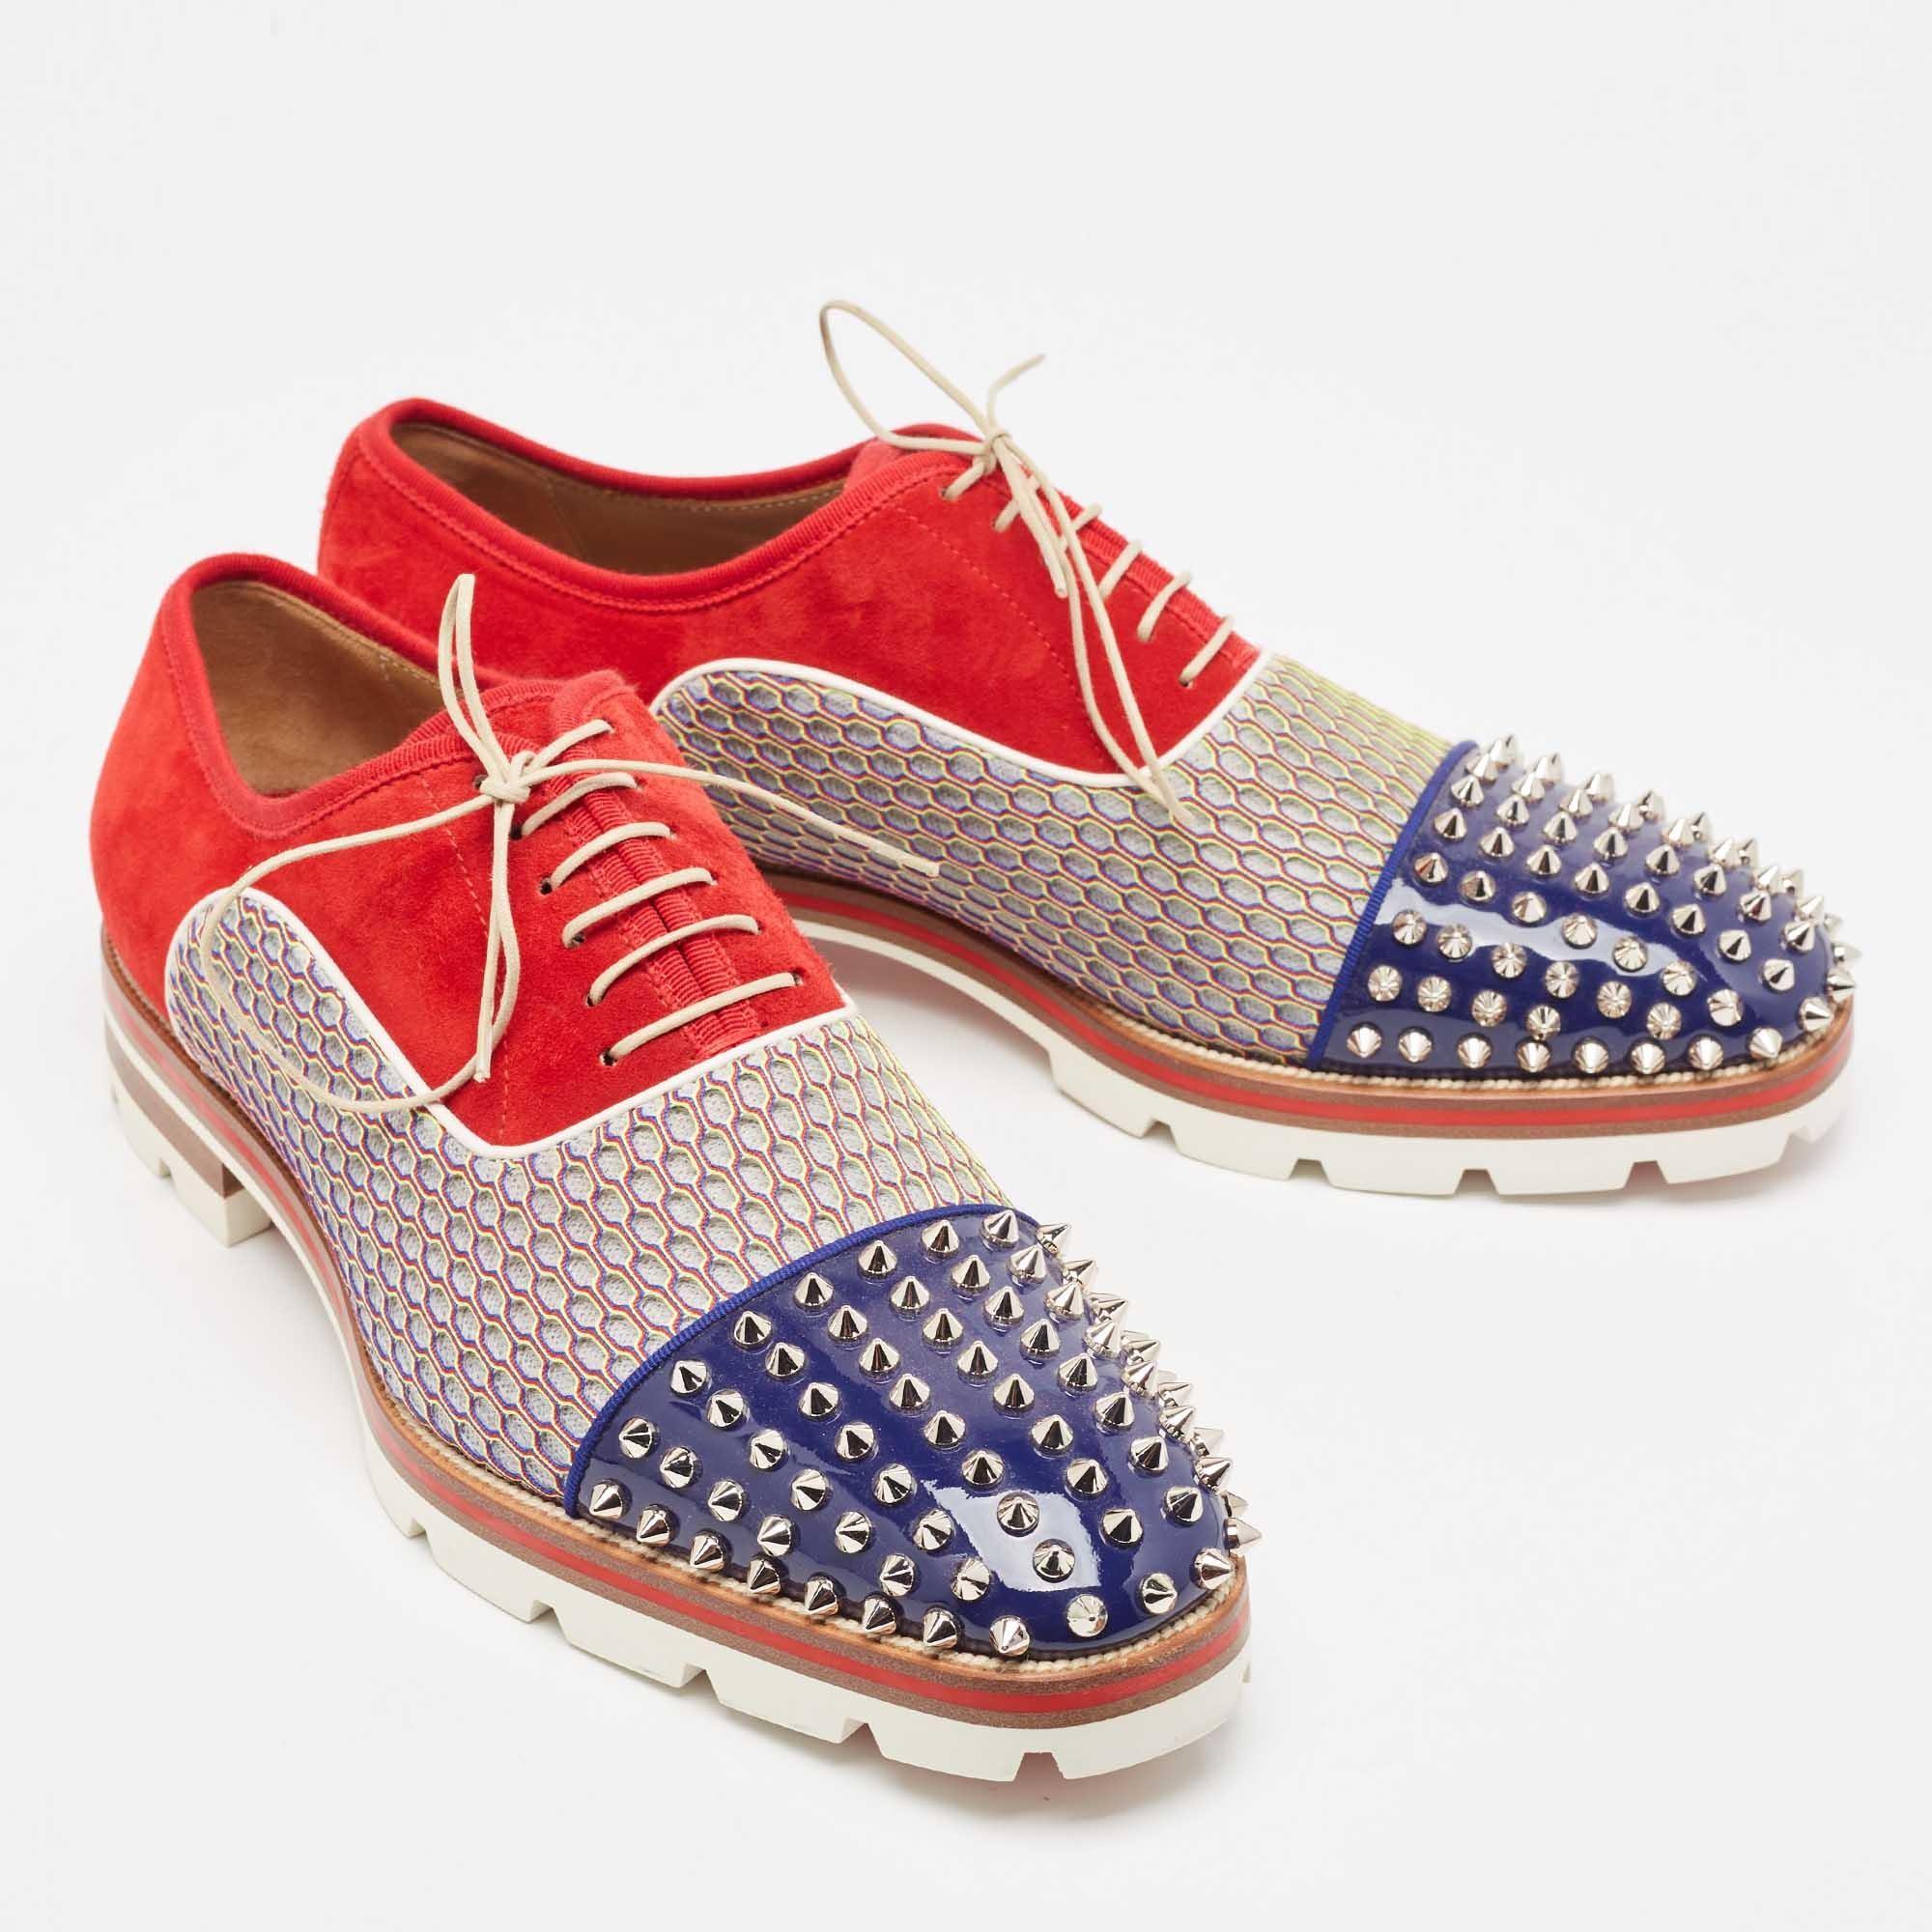 Men's Christian Louboutin Multicolor Suede And Patent Leather Spike Toe Latcho Lace Up For Sale